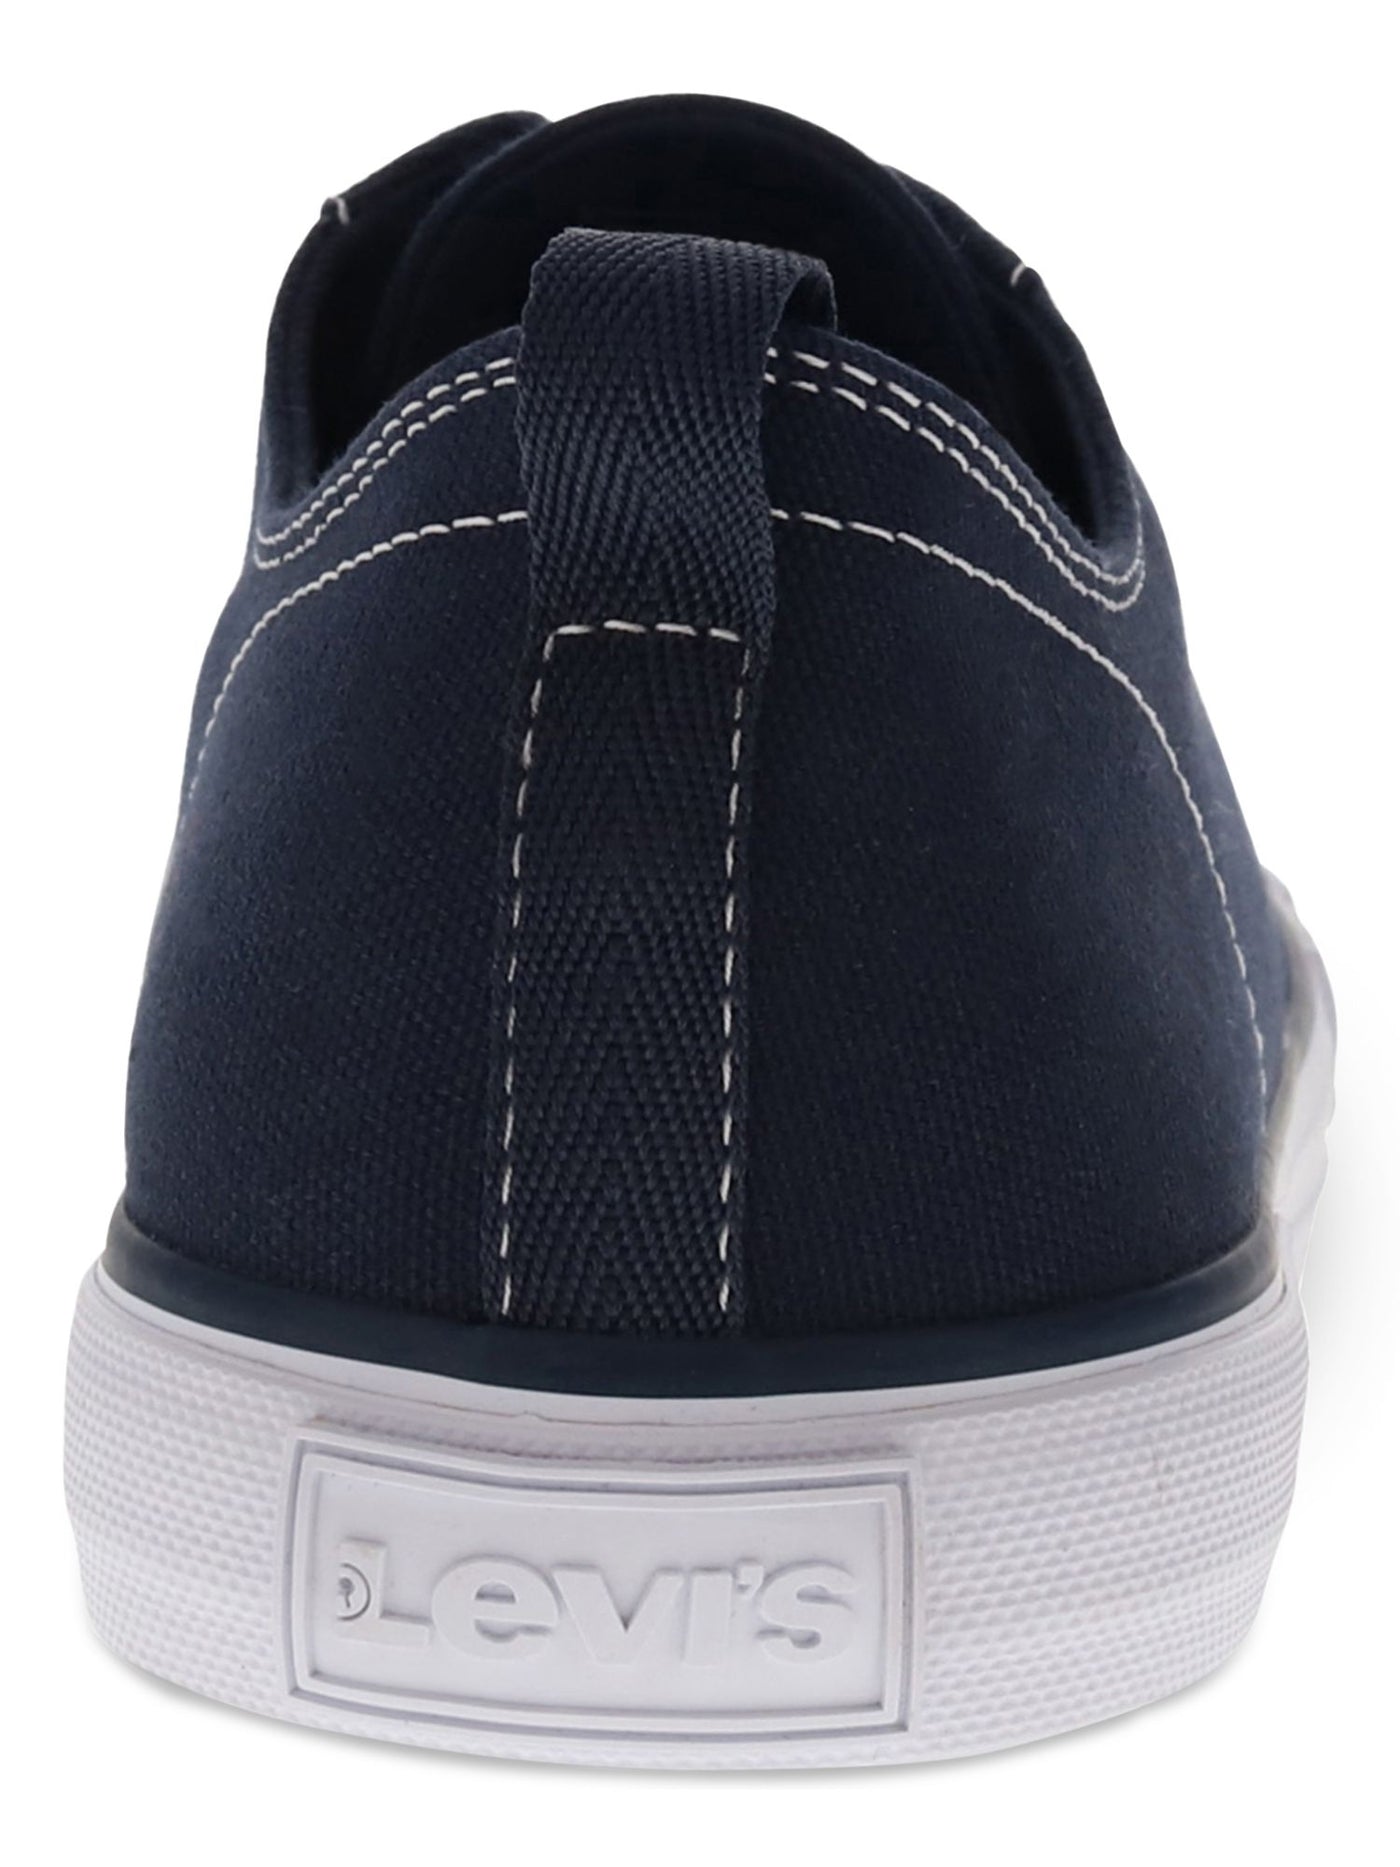 LEVI'S Mens Navy Removable Insole Cushioned Anikin Round Toe Lace-Up Sneakers Shoes 11